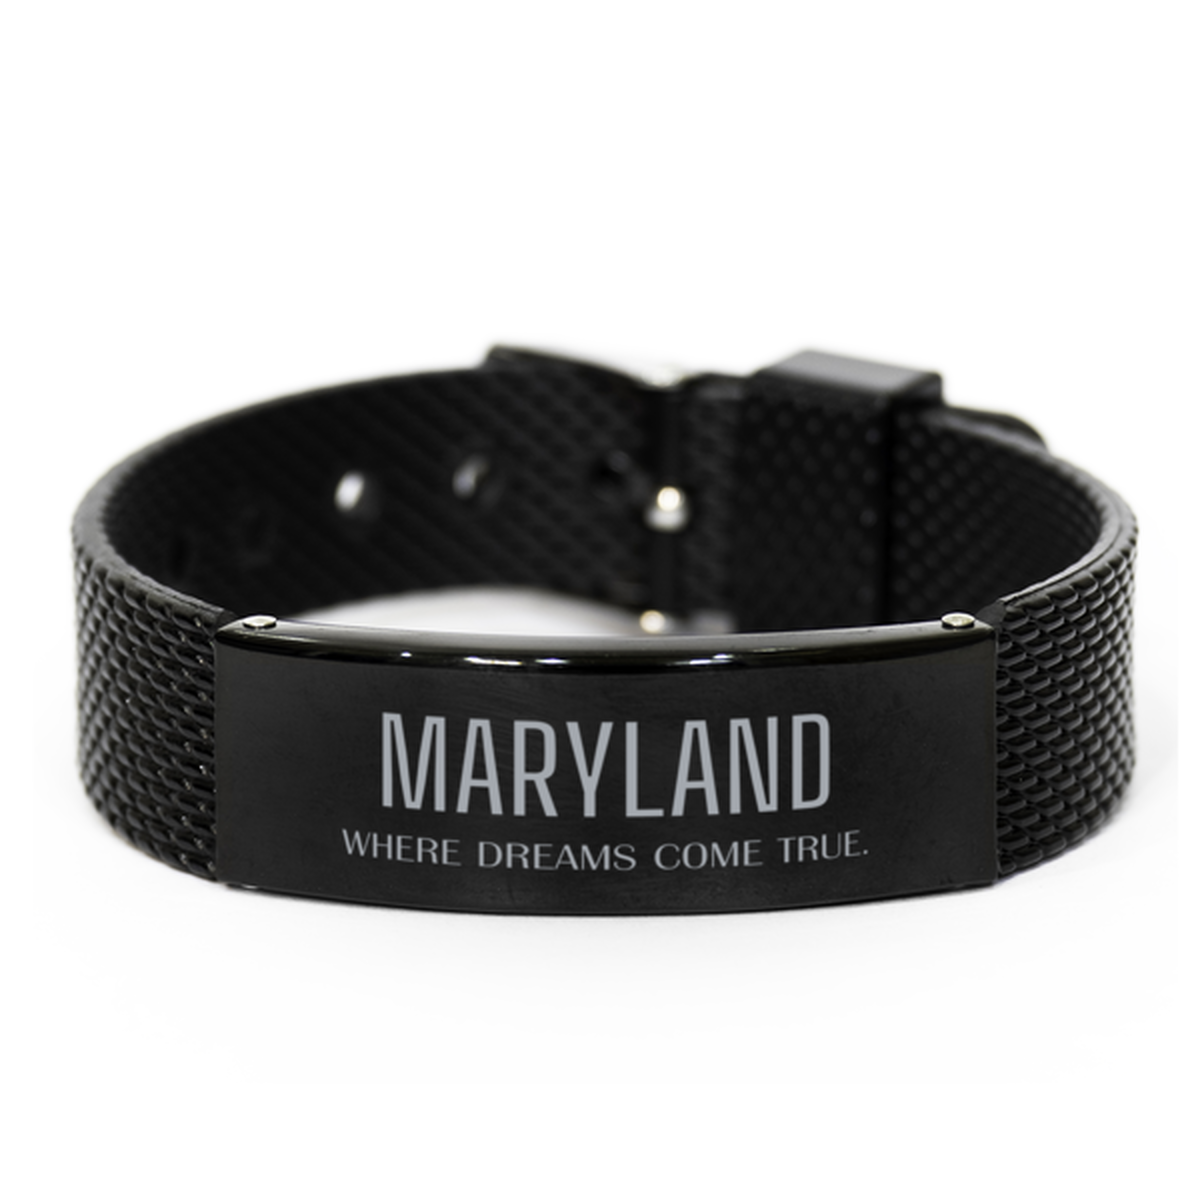 Love Maryland State Black Shark Mesh Bracelet, Maryland Where dreams come true, Birthday Inspirational Gifts For Maryland Men, Women, Friends